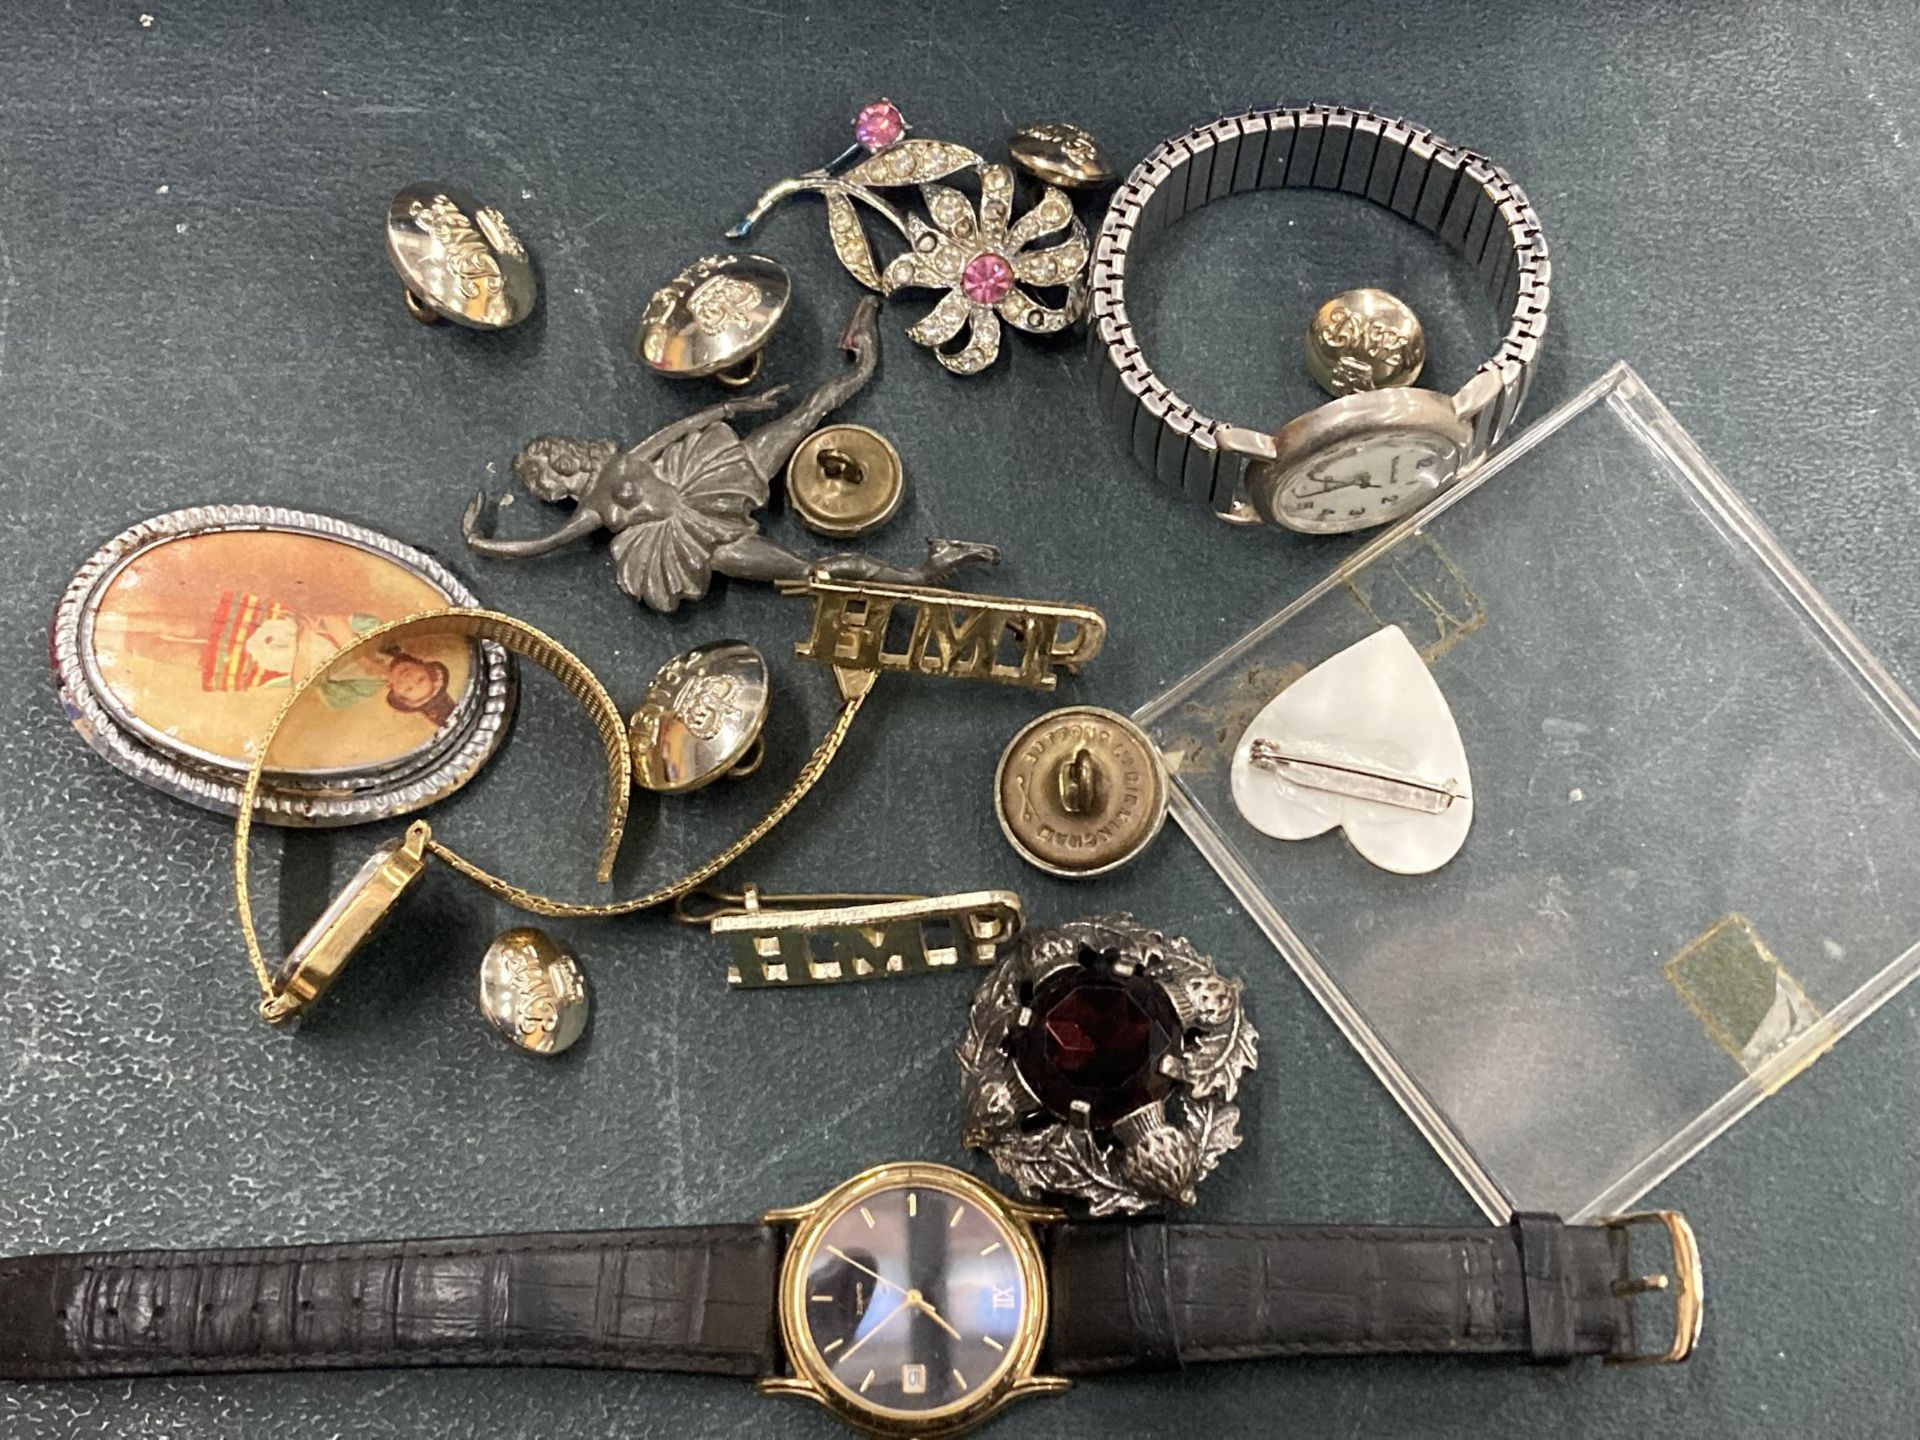 A MIXED LOT OF JEWELLERY AND FURTHER ITEMS, QUARTZ WATCHES ETC